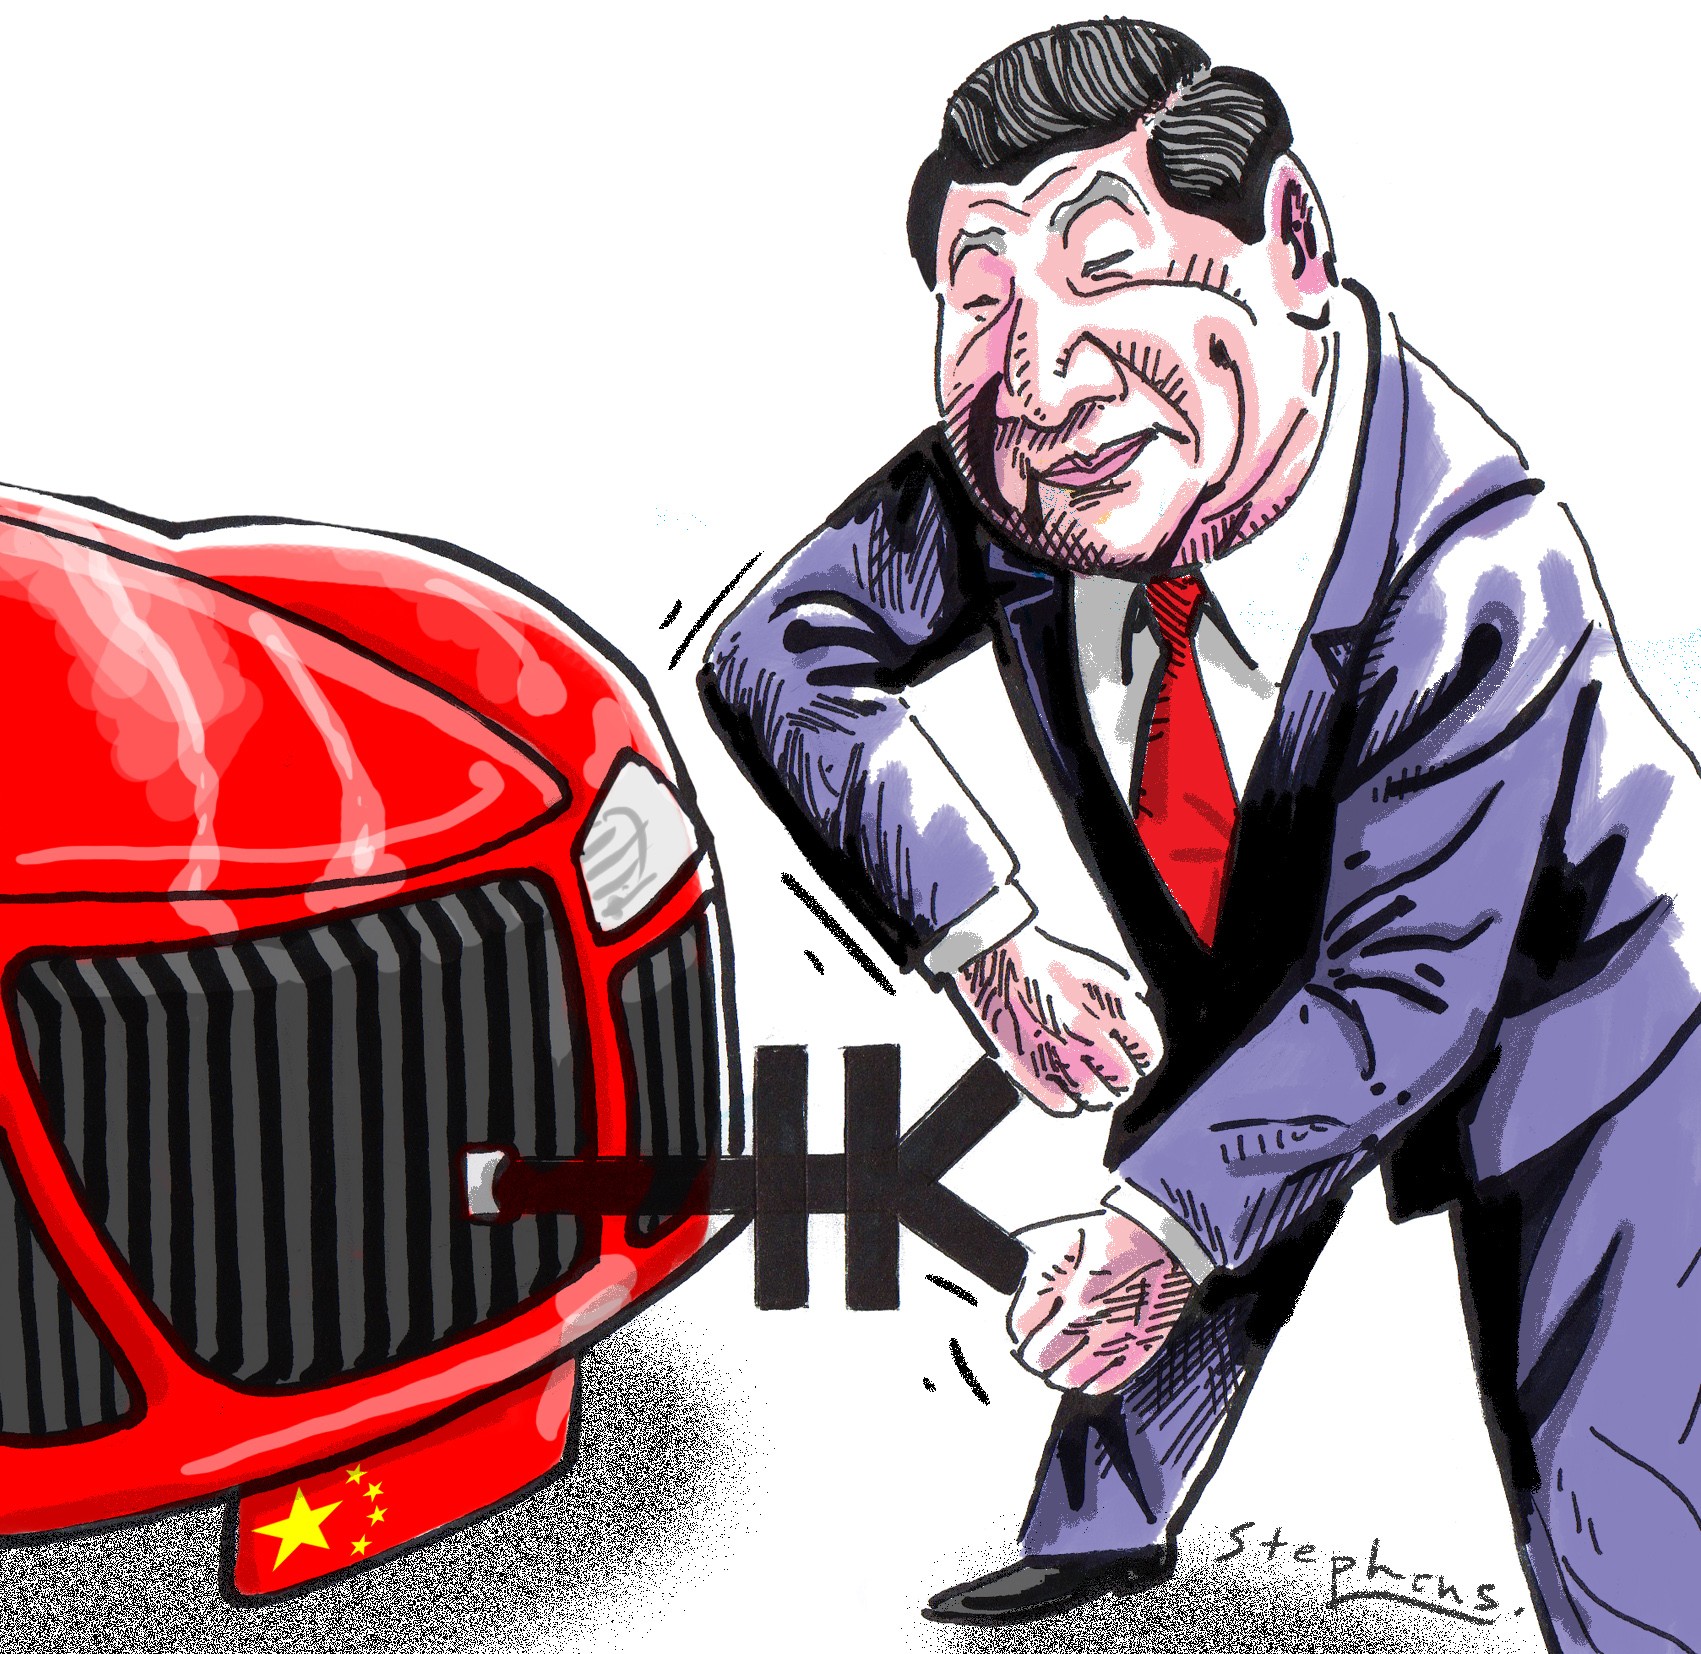 Deng Yuwen says there are many reasons China must recommit itself to its reform and opening up policy, not least because further reforms would help it meet its own development goals, and avoid a trade war with the US and Europe